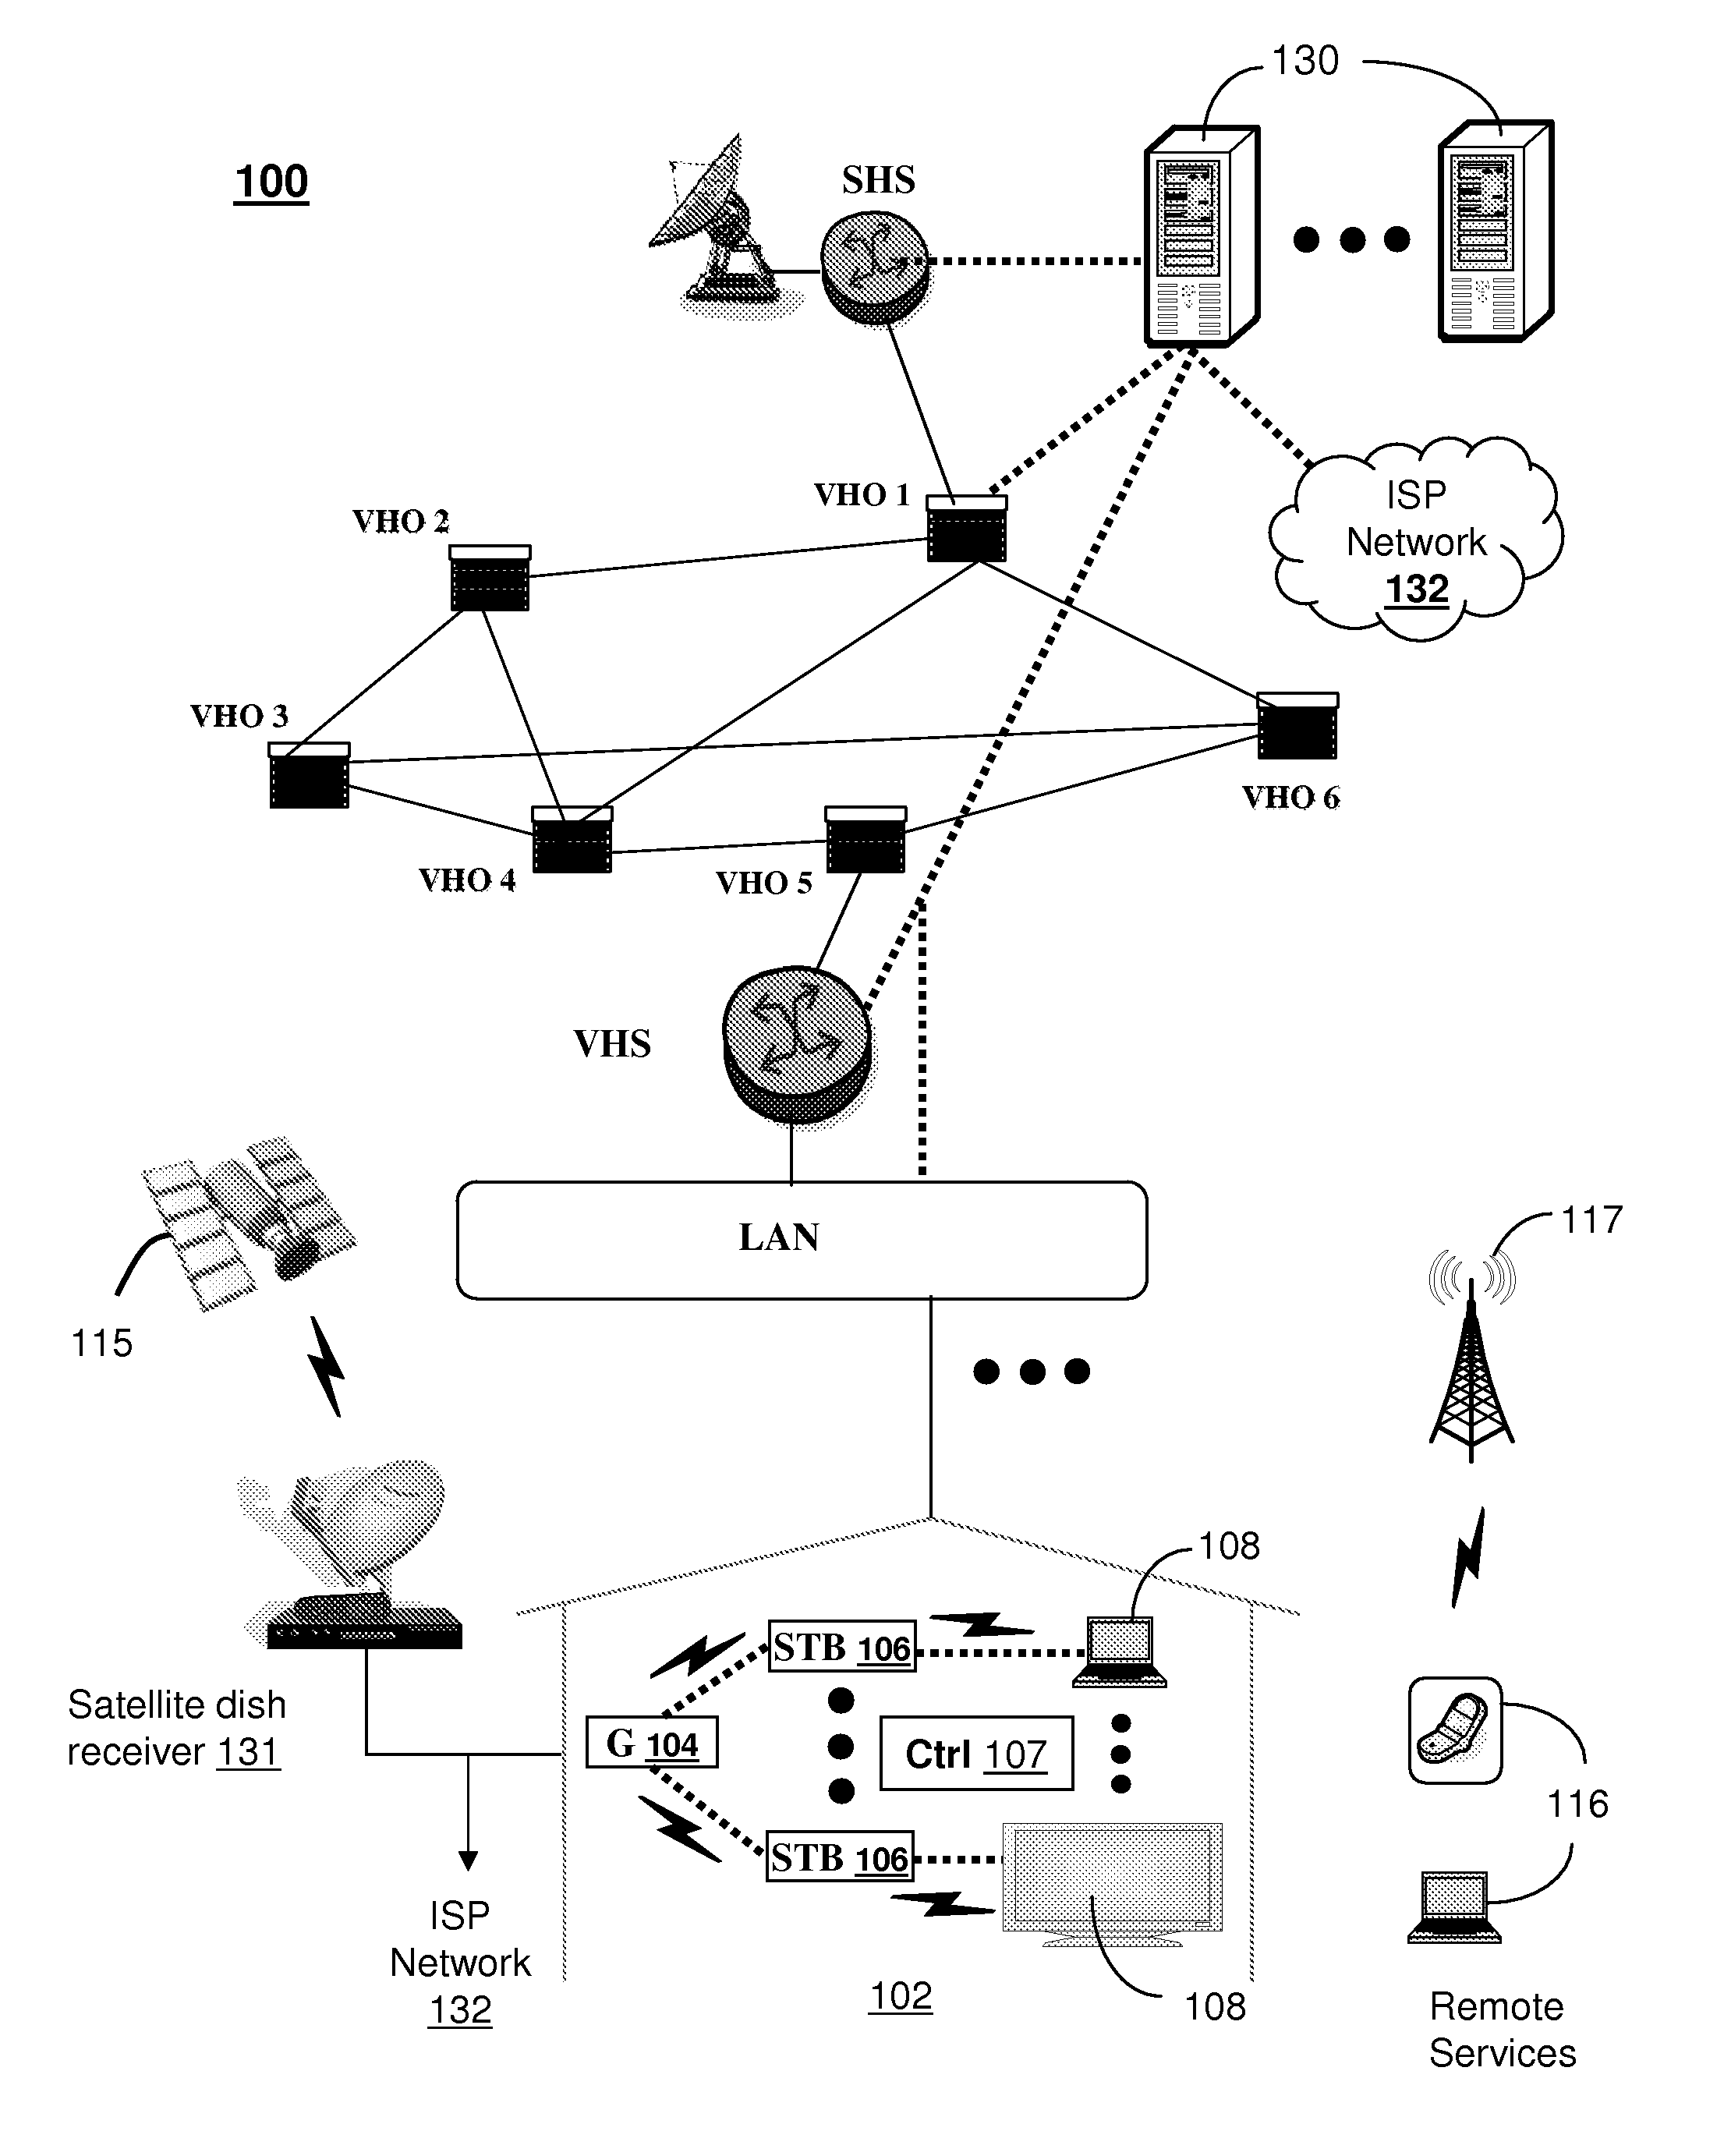 System for presenting graphical user interface windows